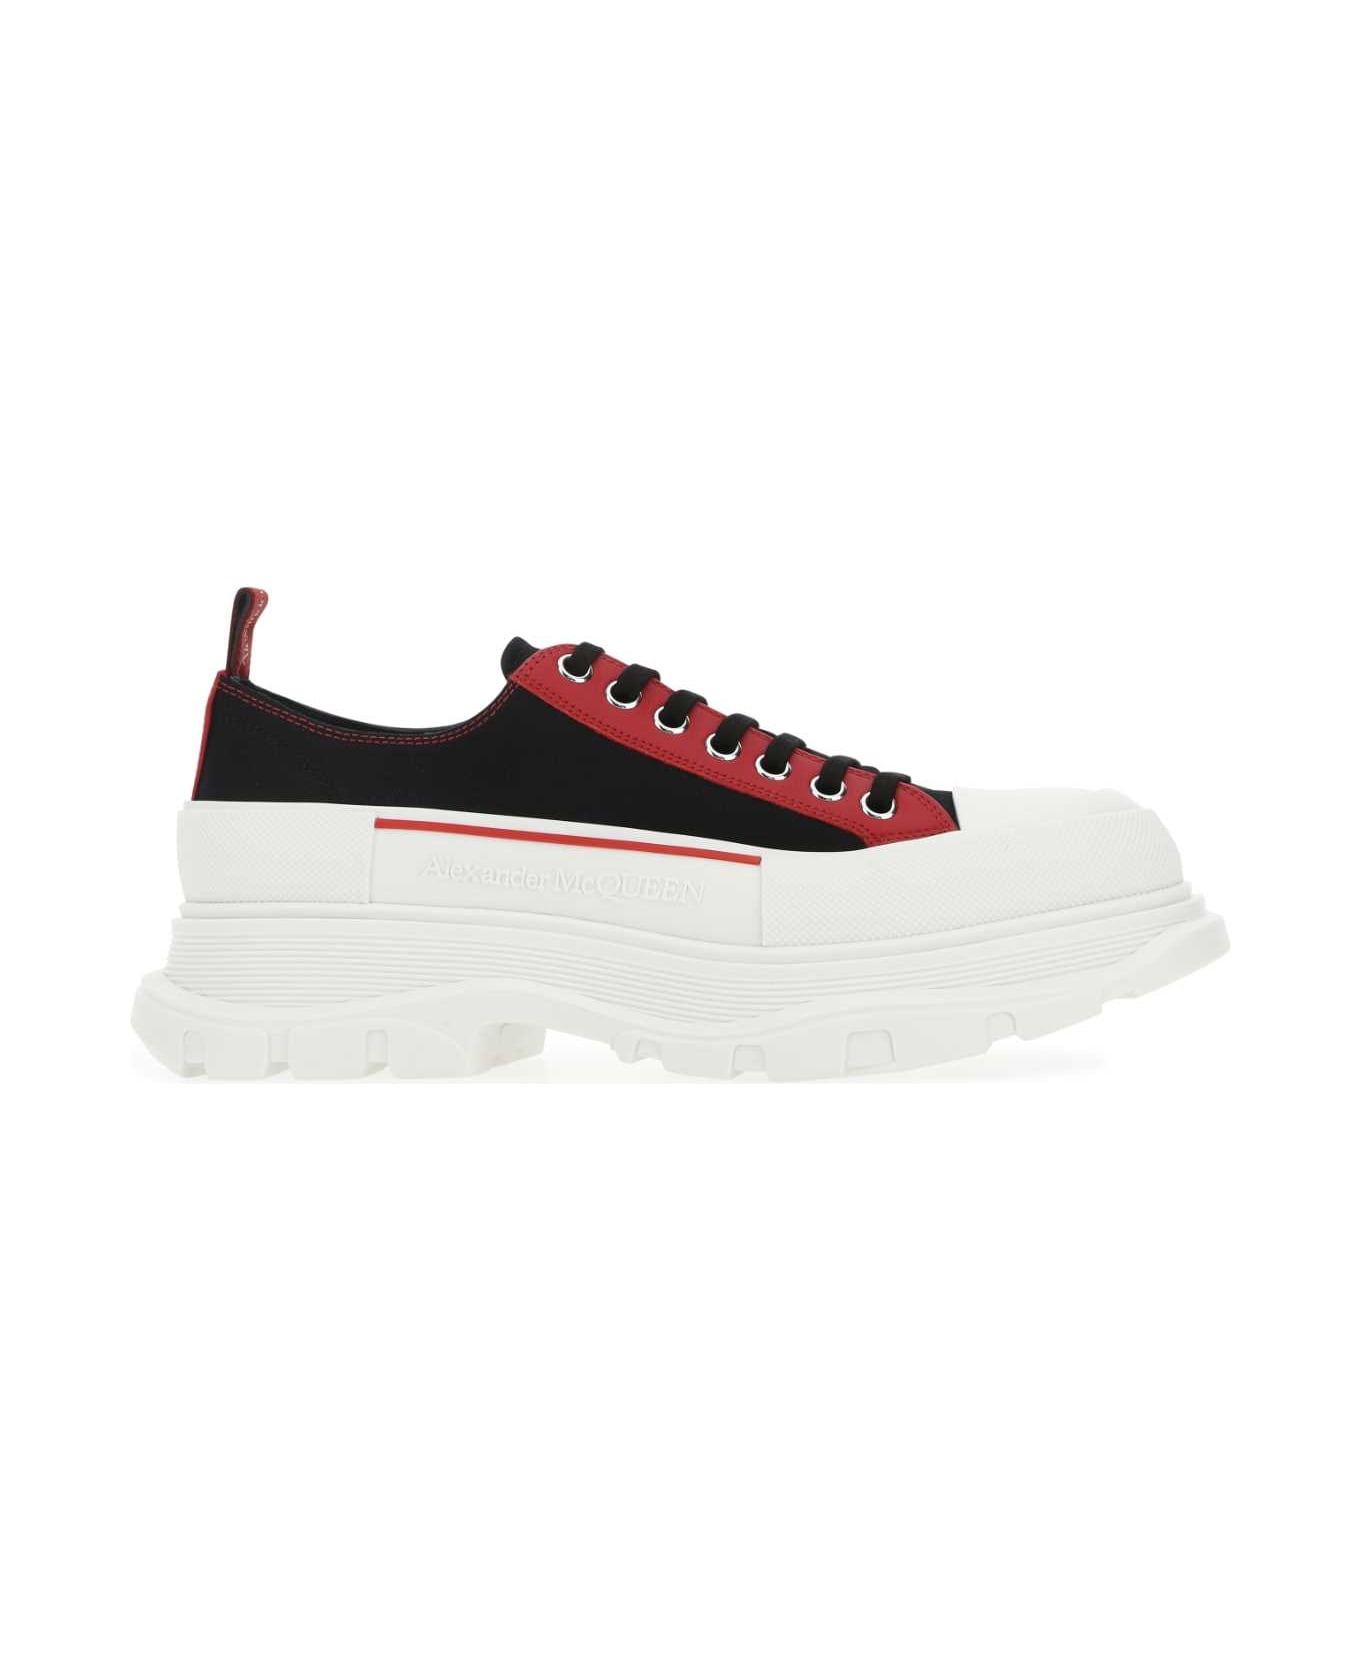 Alexander McQueen Multicolor Canvas And Leather Tread Slick Sneakers - 1549 スニーカー